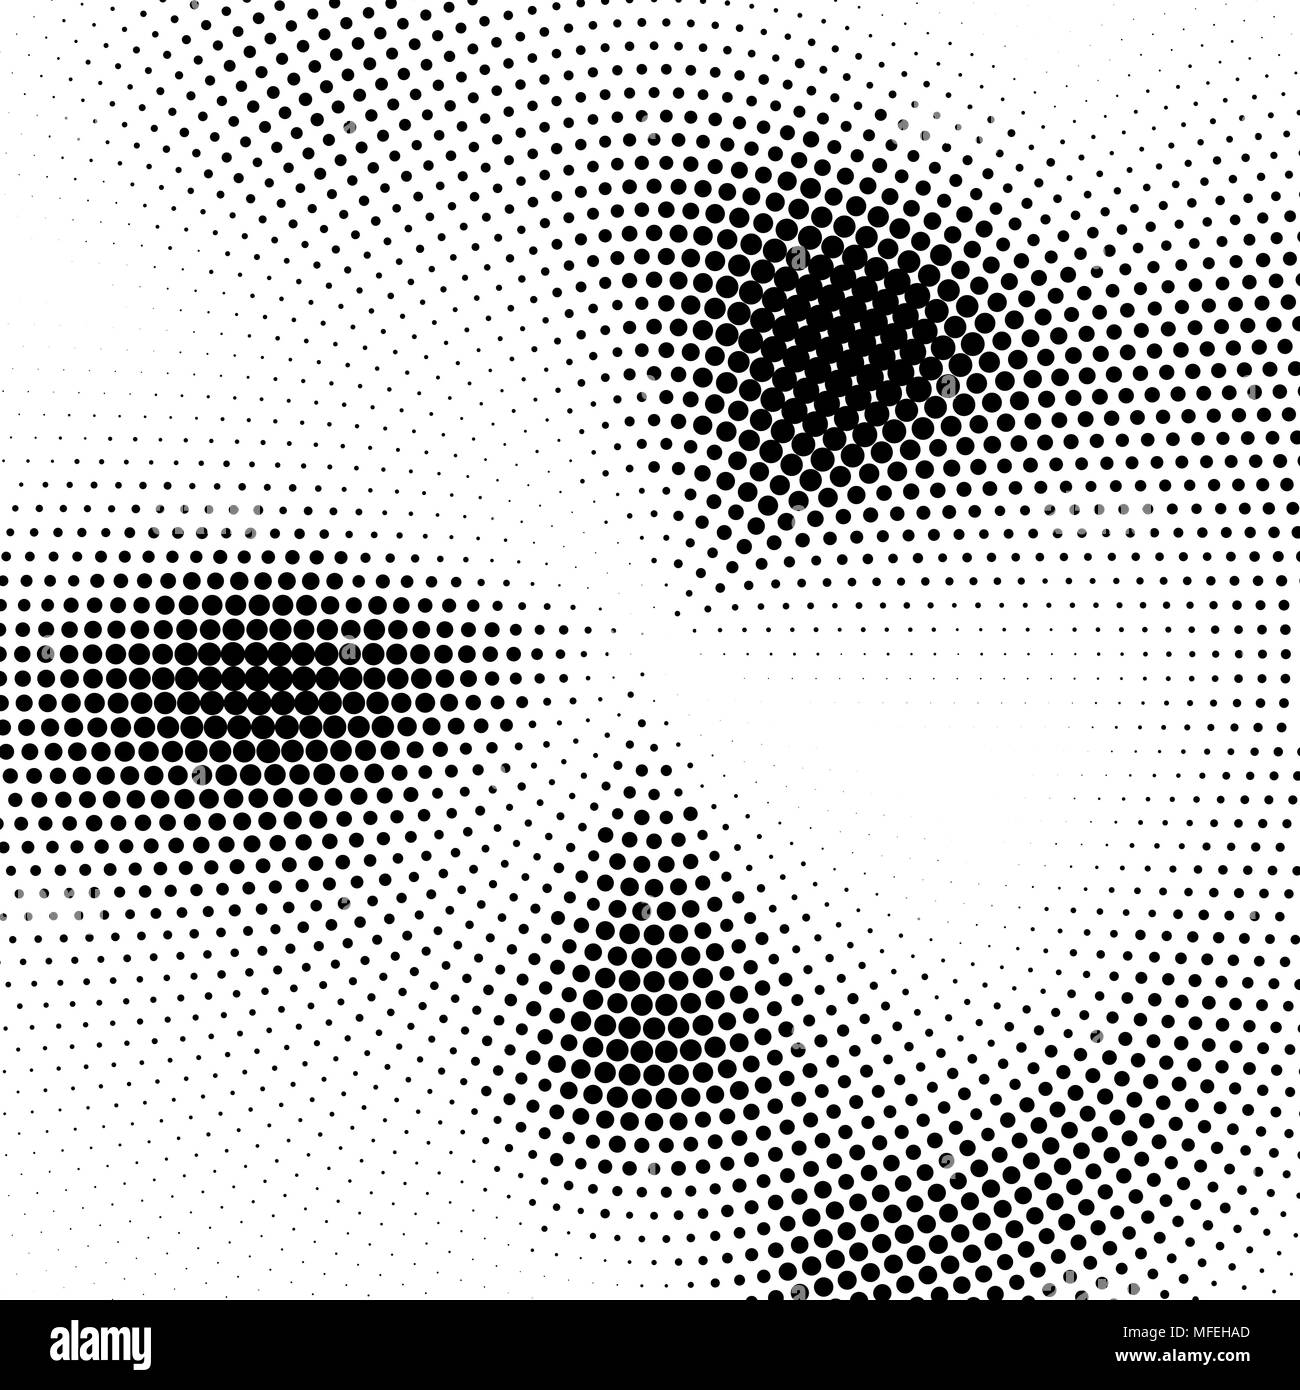 Abstract Halftone Texture. Vector black and white background Stock Vector